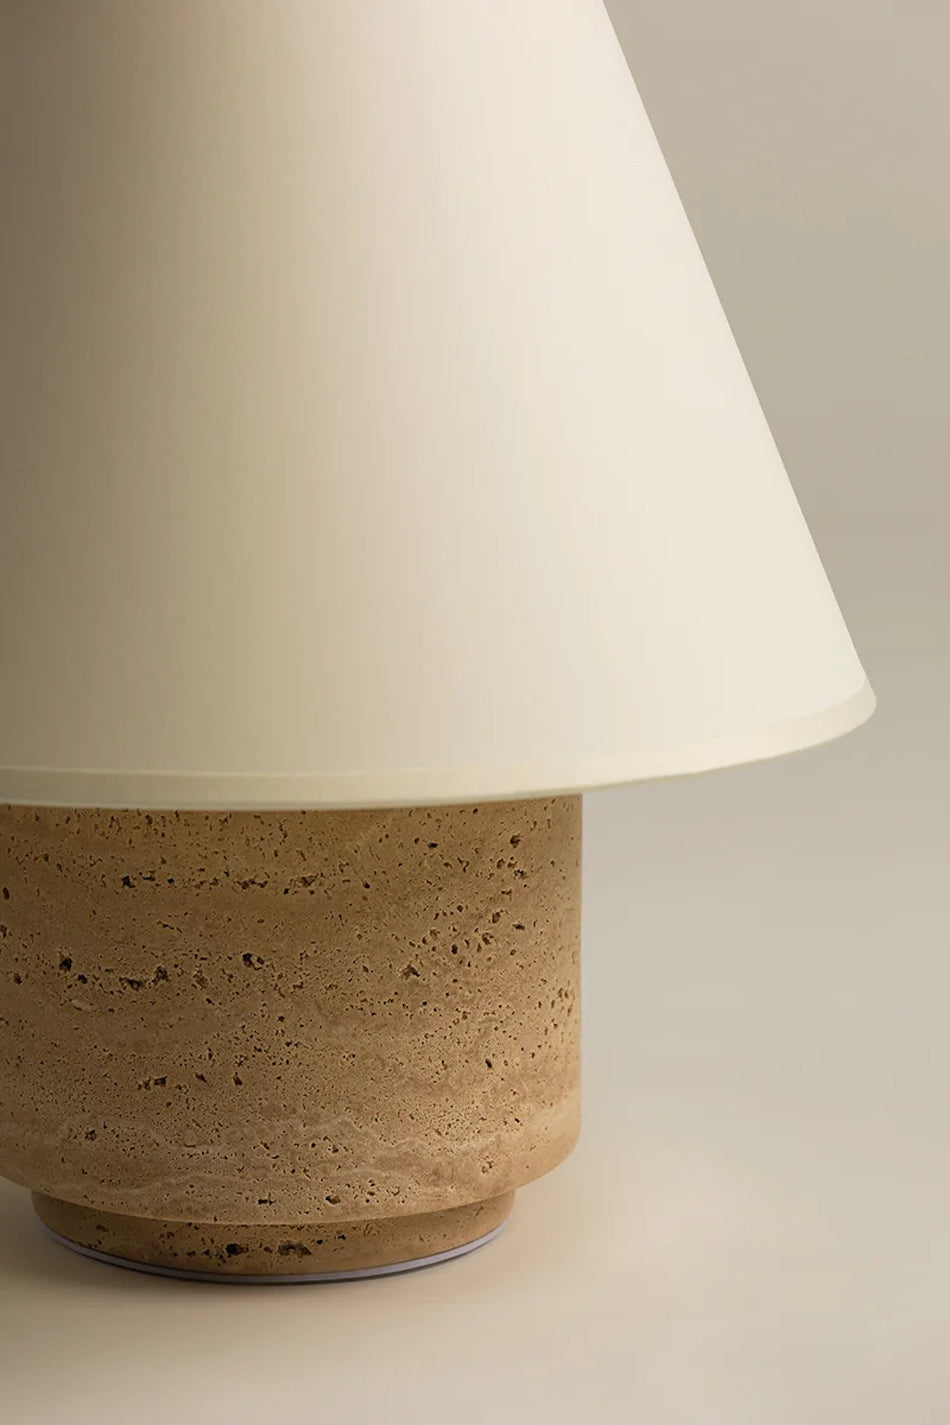 Bronte Table Lamp